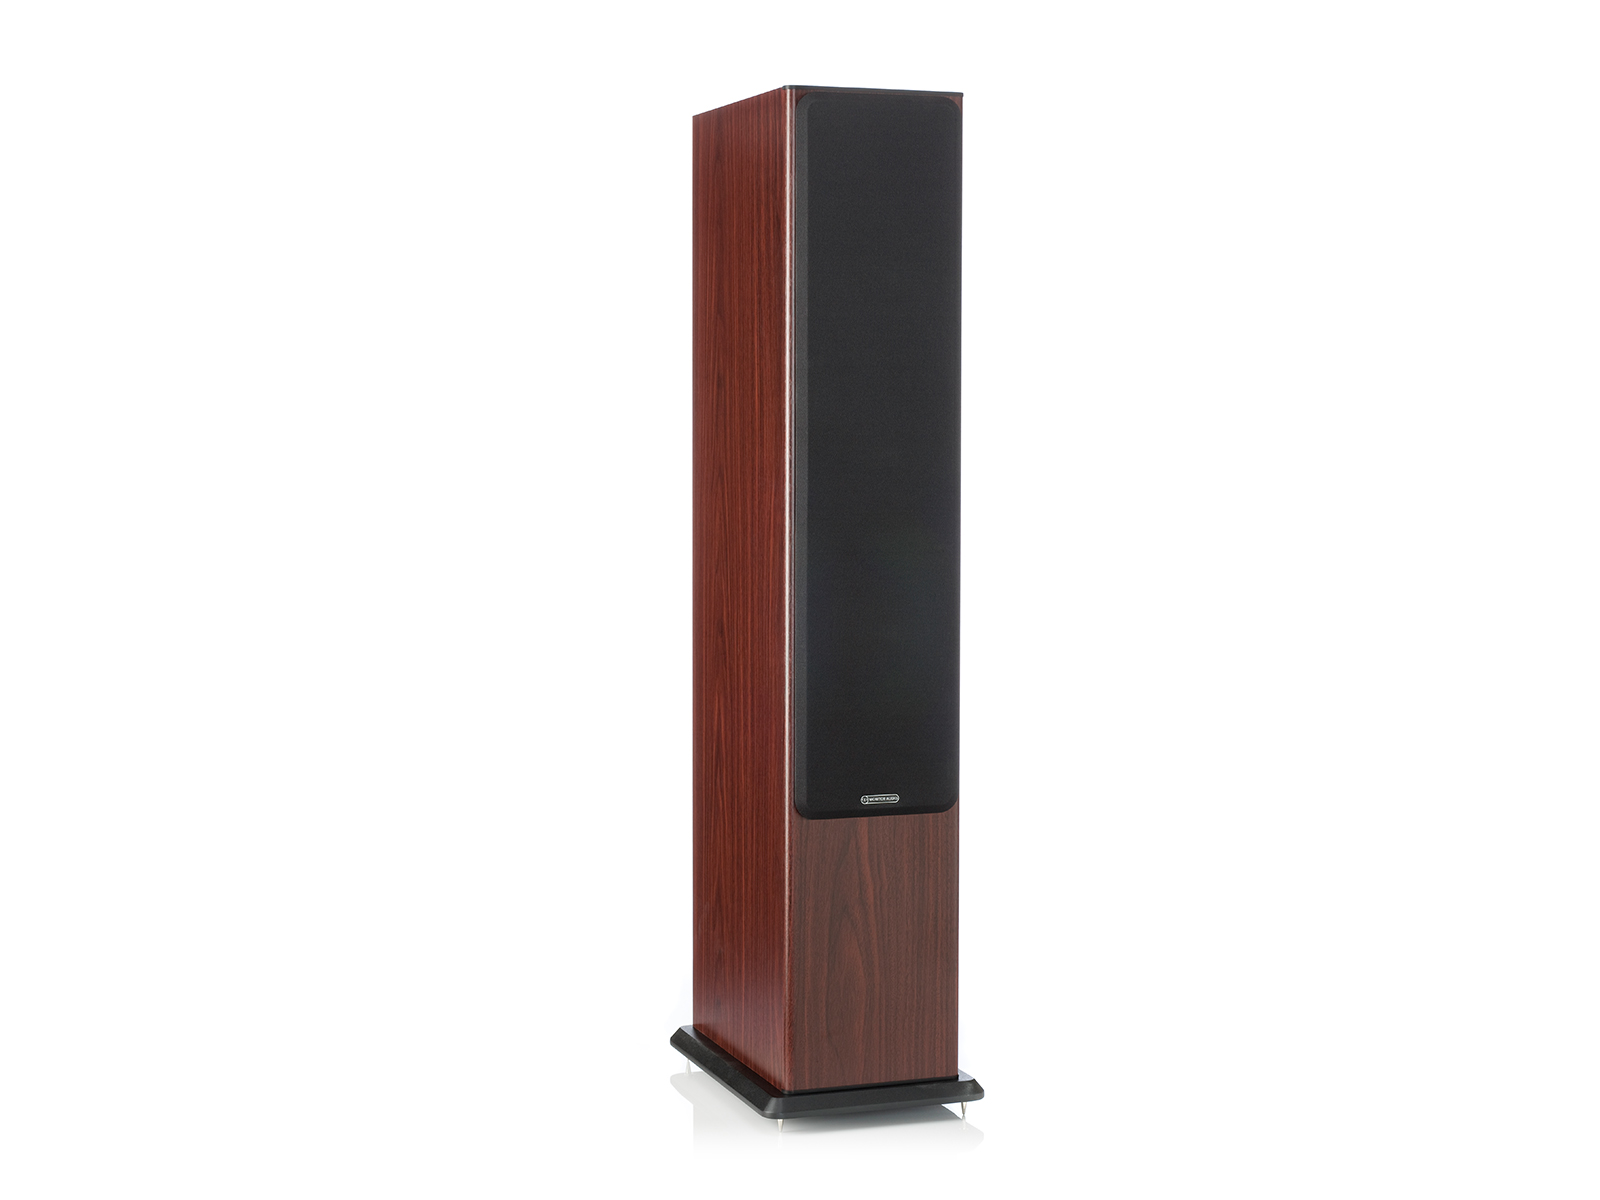 Bronze 6, floorstanding speakers, featuring a grille and a walnut vinyl finish.